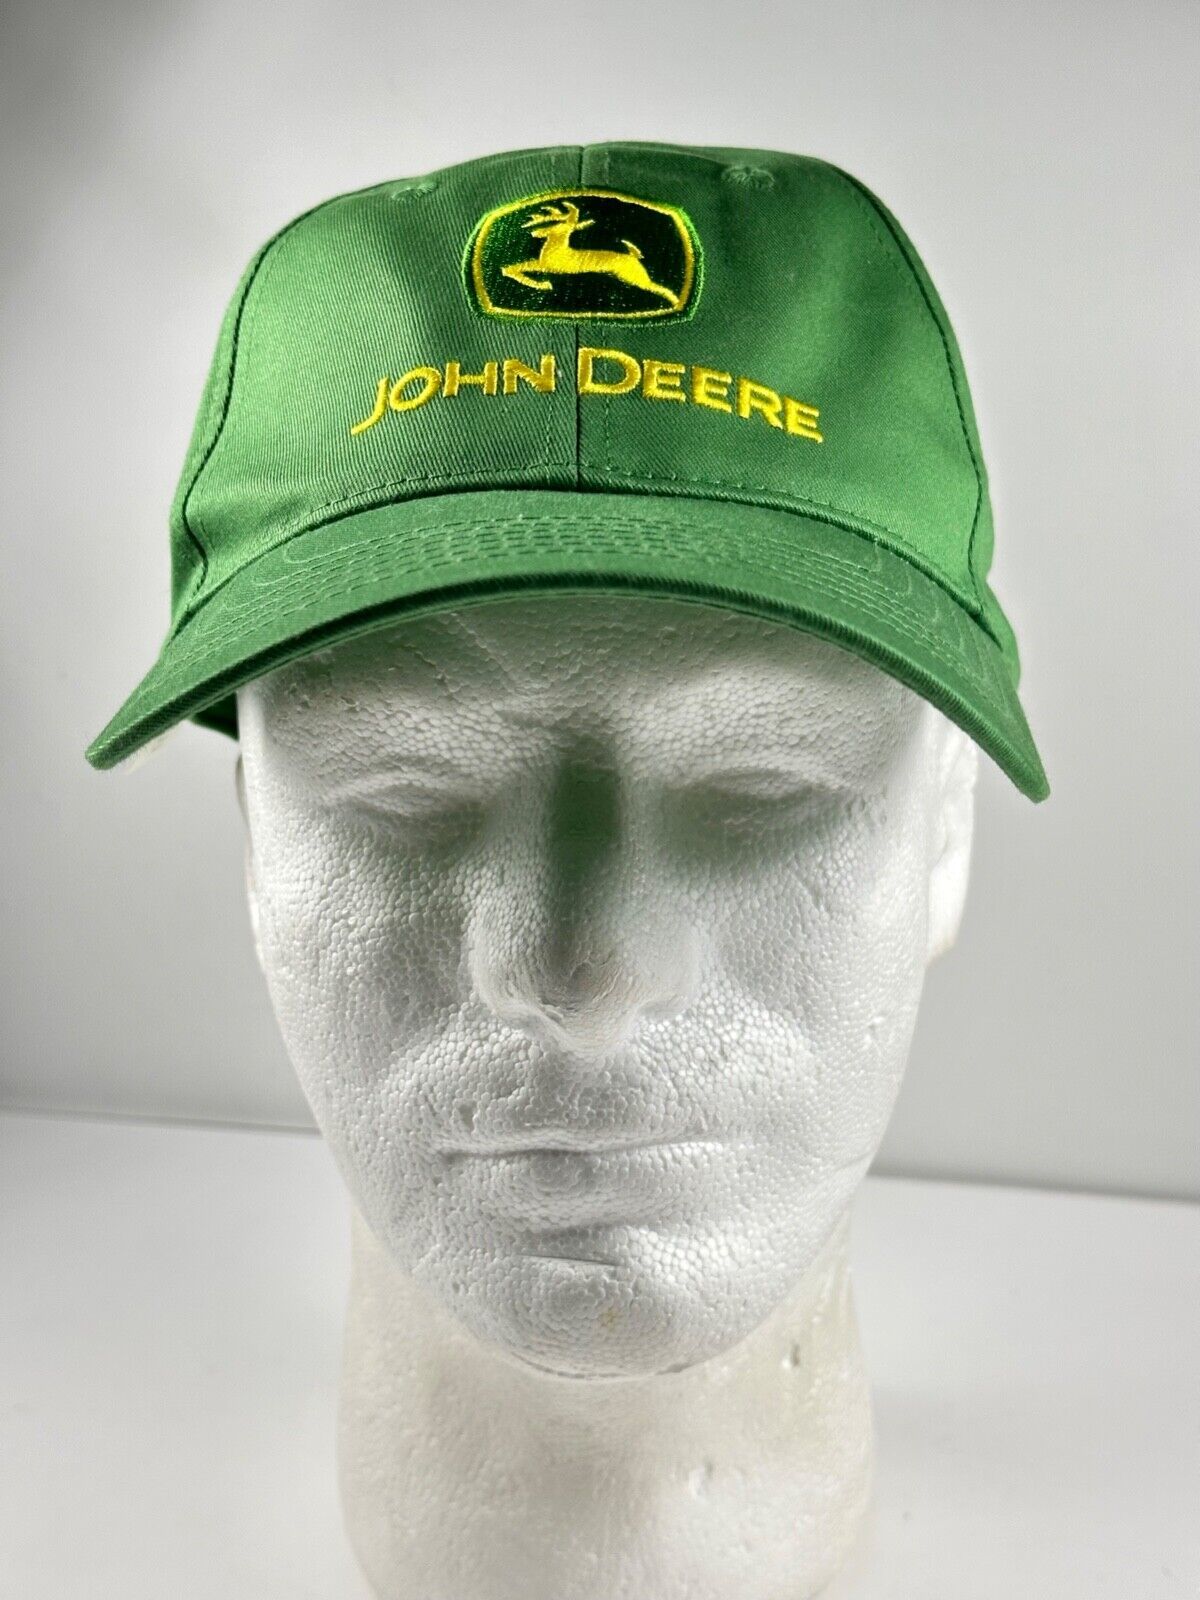 Primary image for John Deere Cap Hat Green Embroidered  Green/Yellow Patch Snapback #125441  HBIII